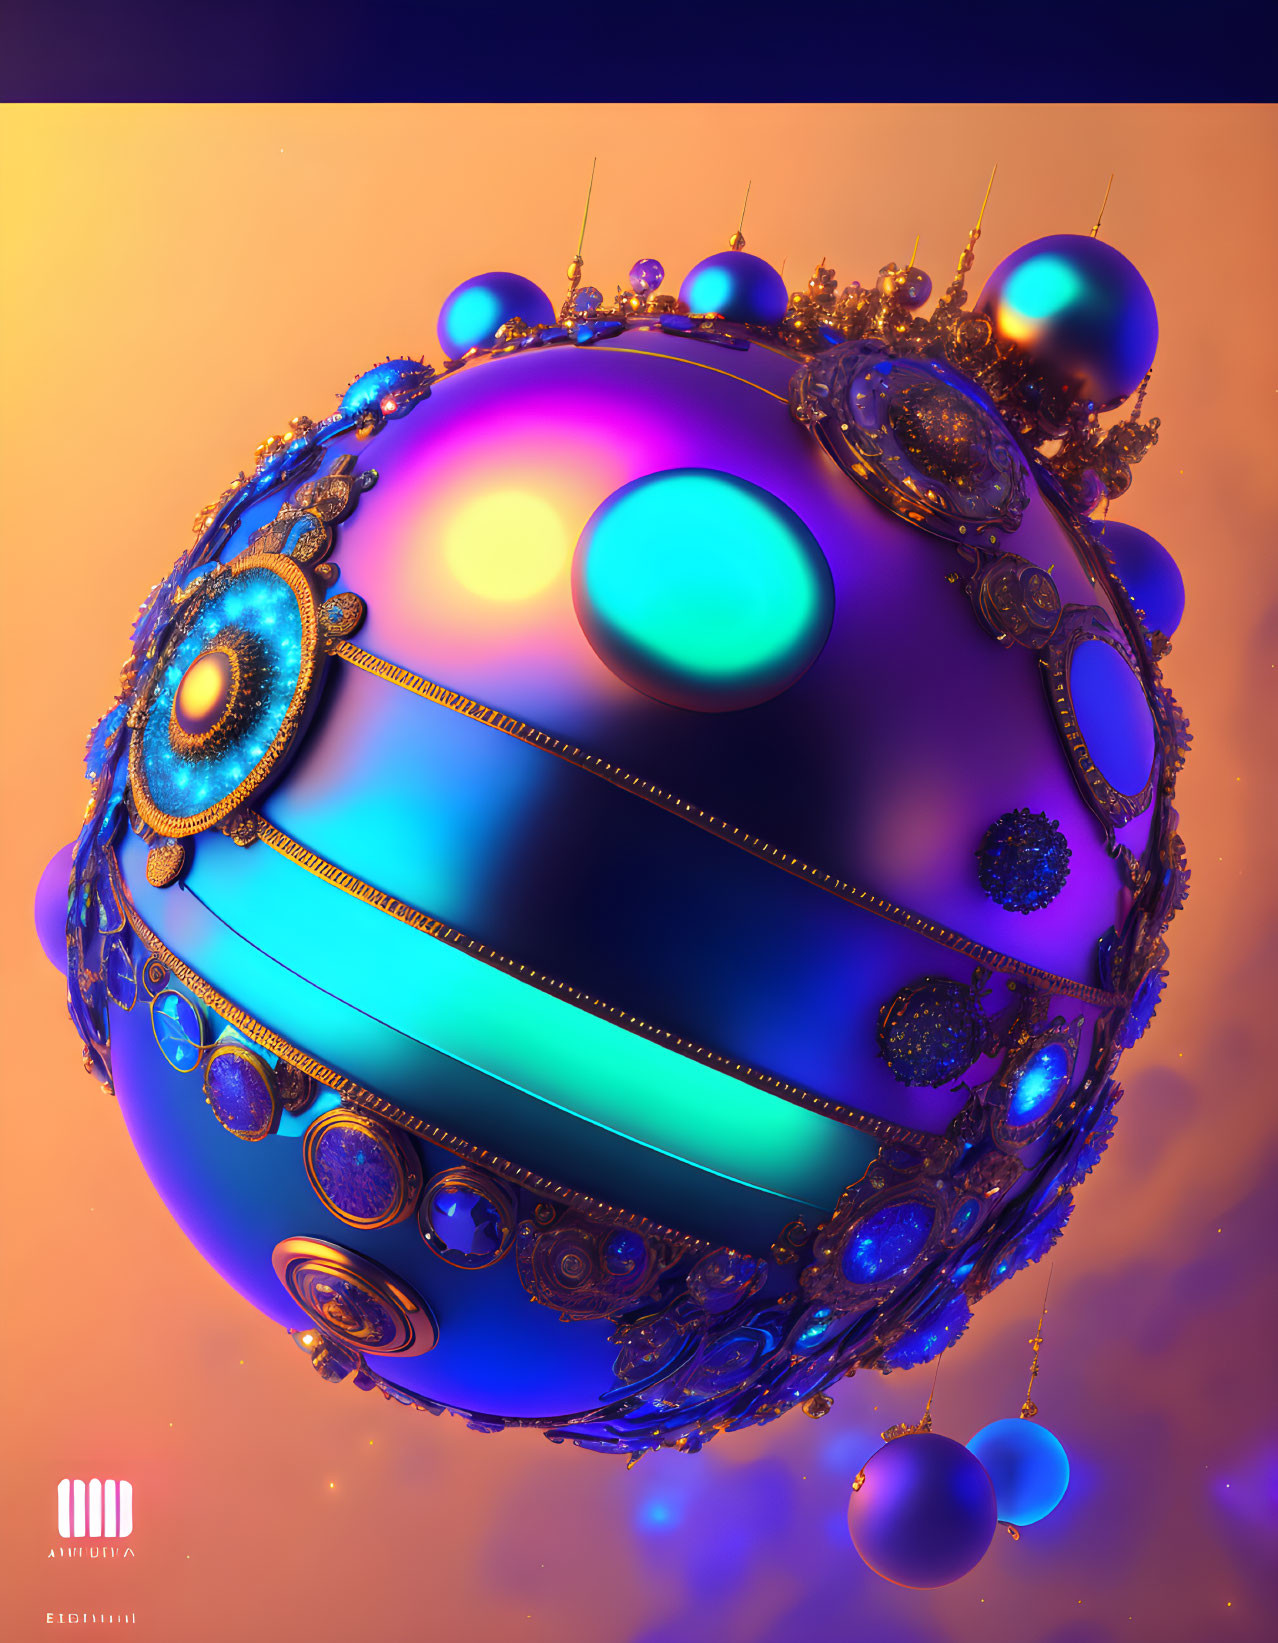 Multicolored ornate sphere with gold details on warm gradient background